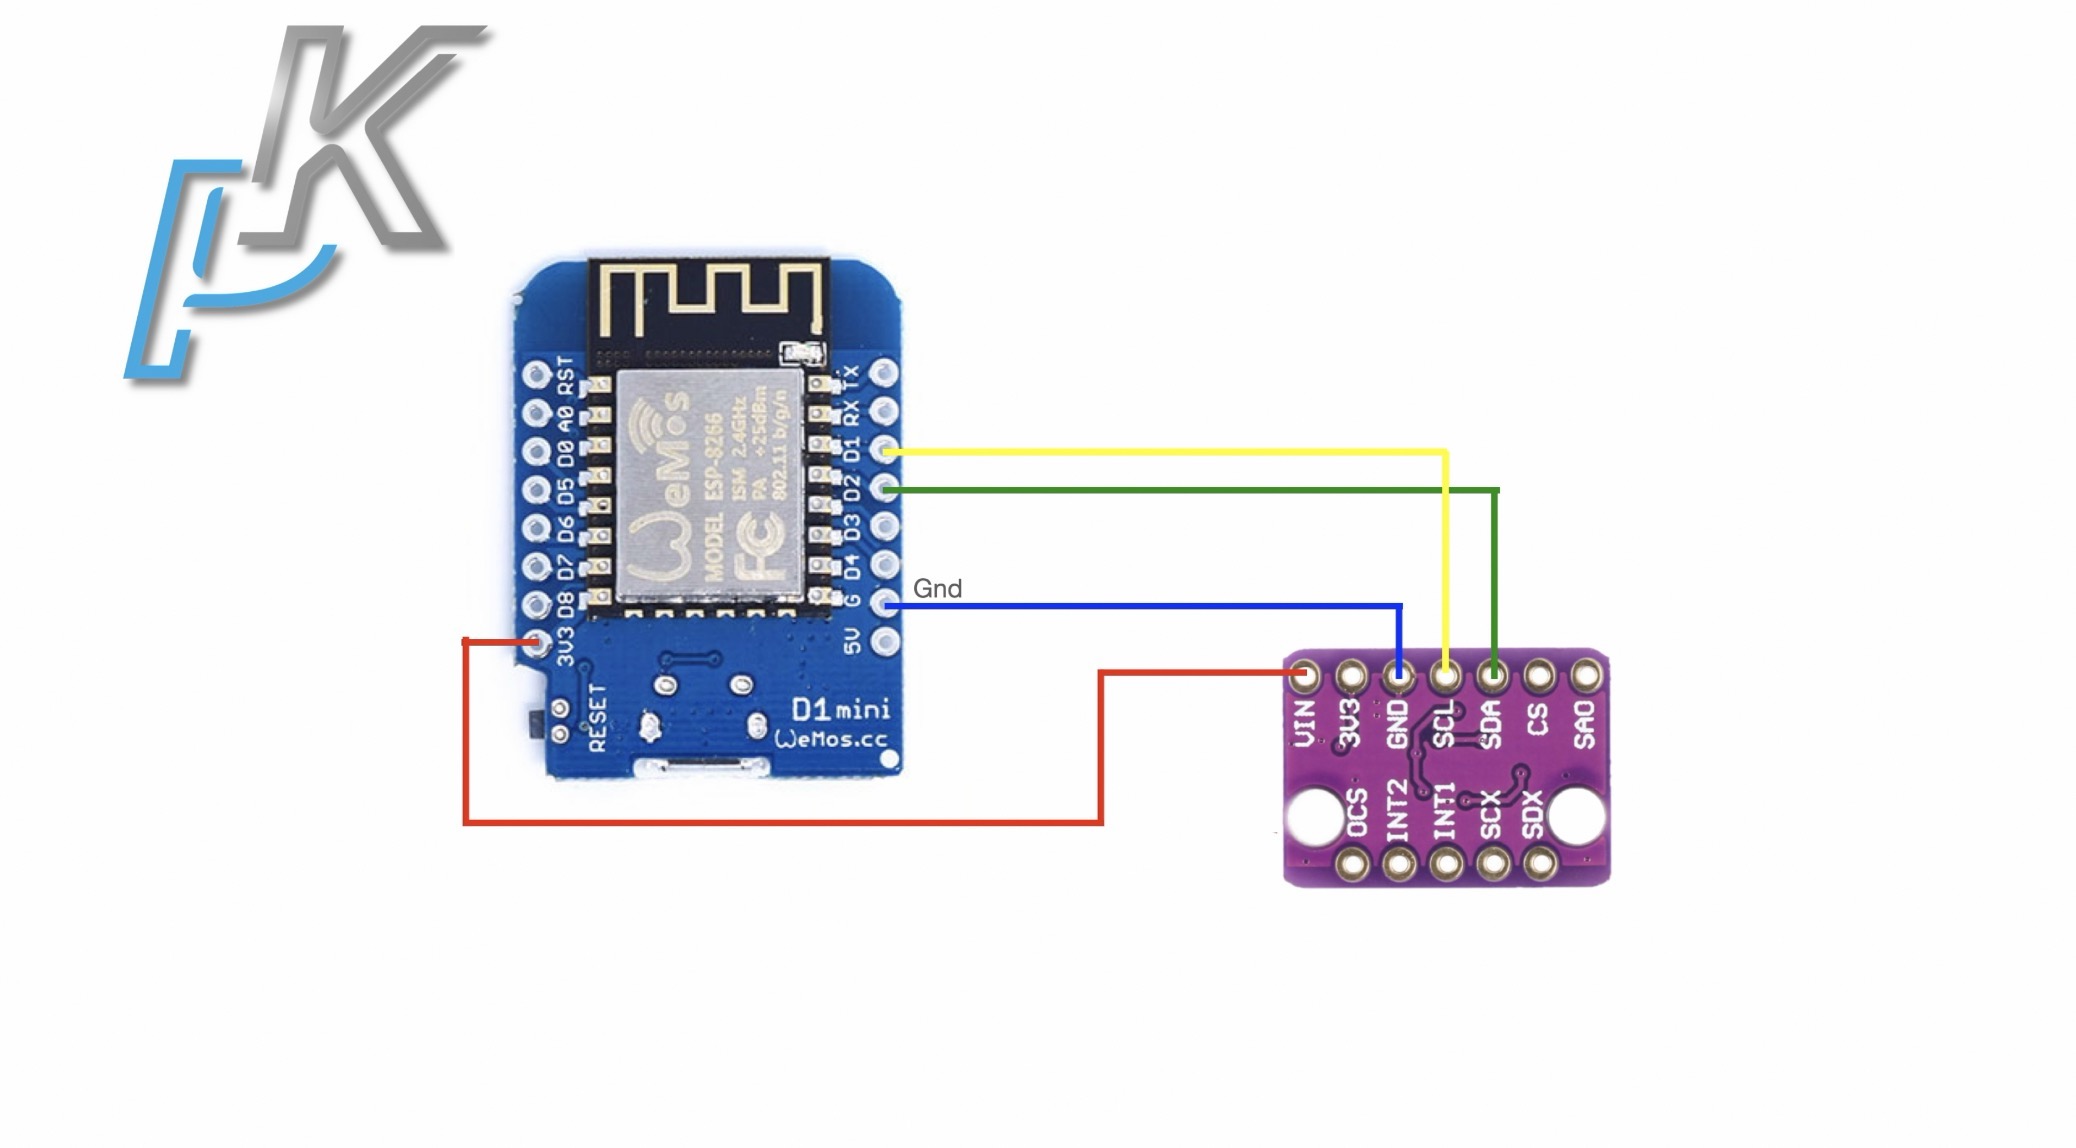 Wiring of the BMI160 and D1 Mini so that the smart gyroscope + accelerometer sensor for home assistant to be made